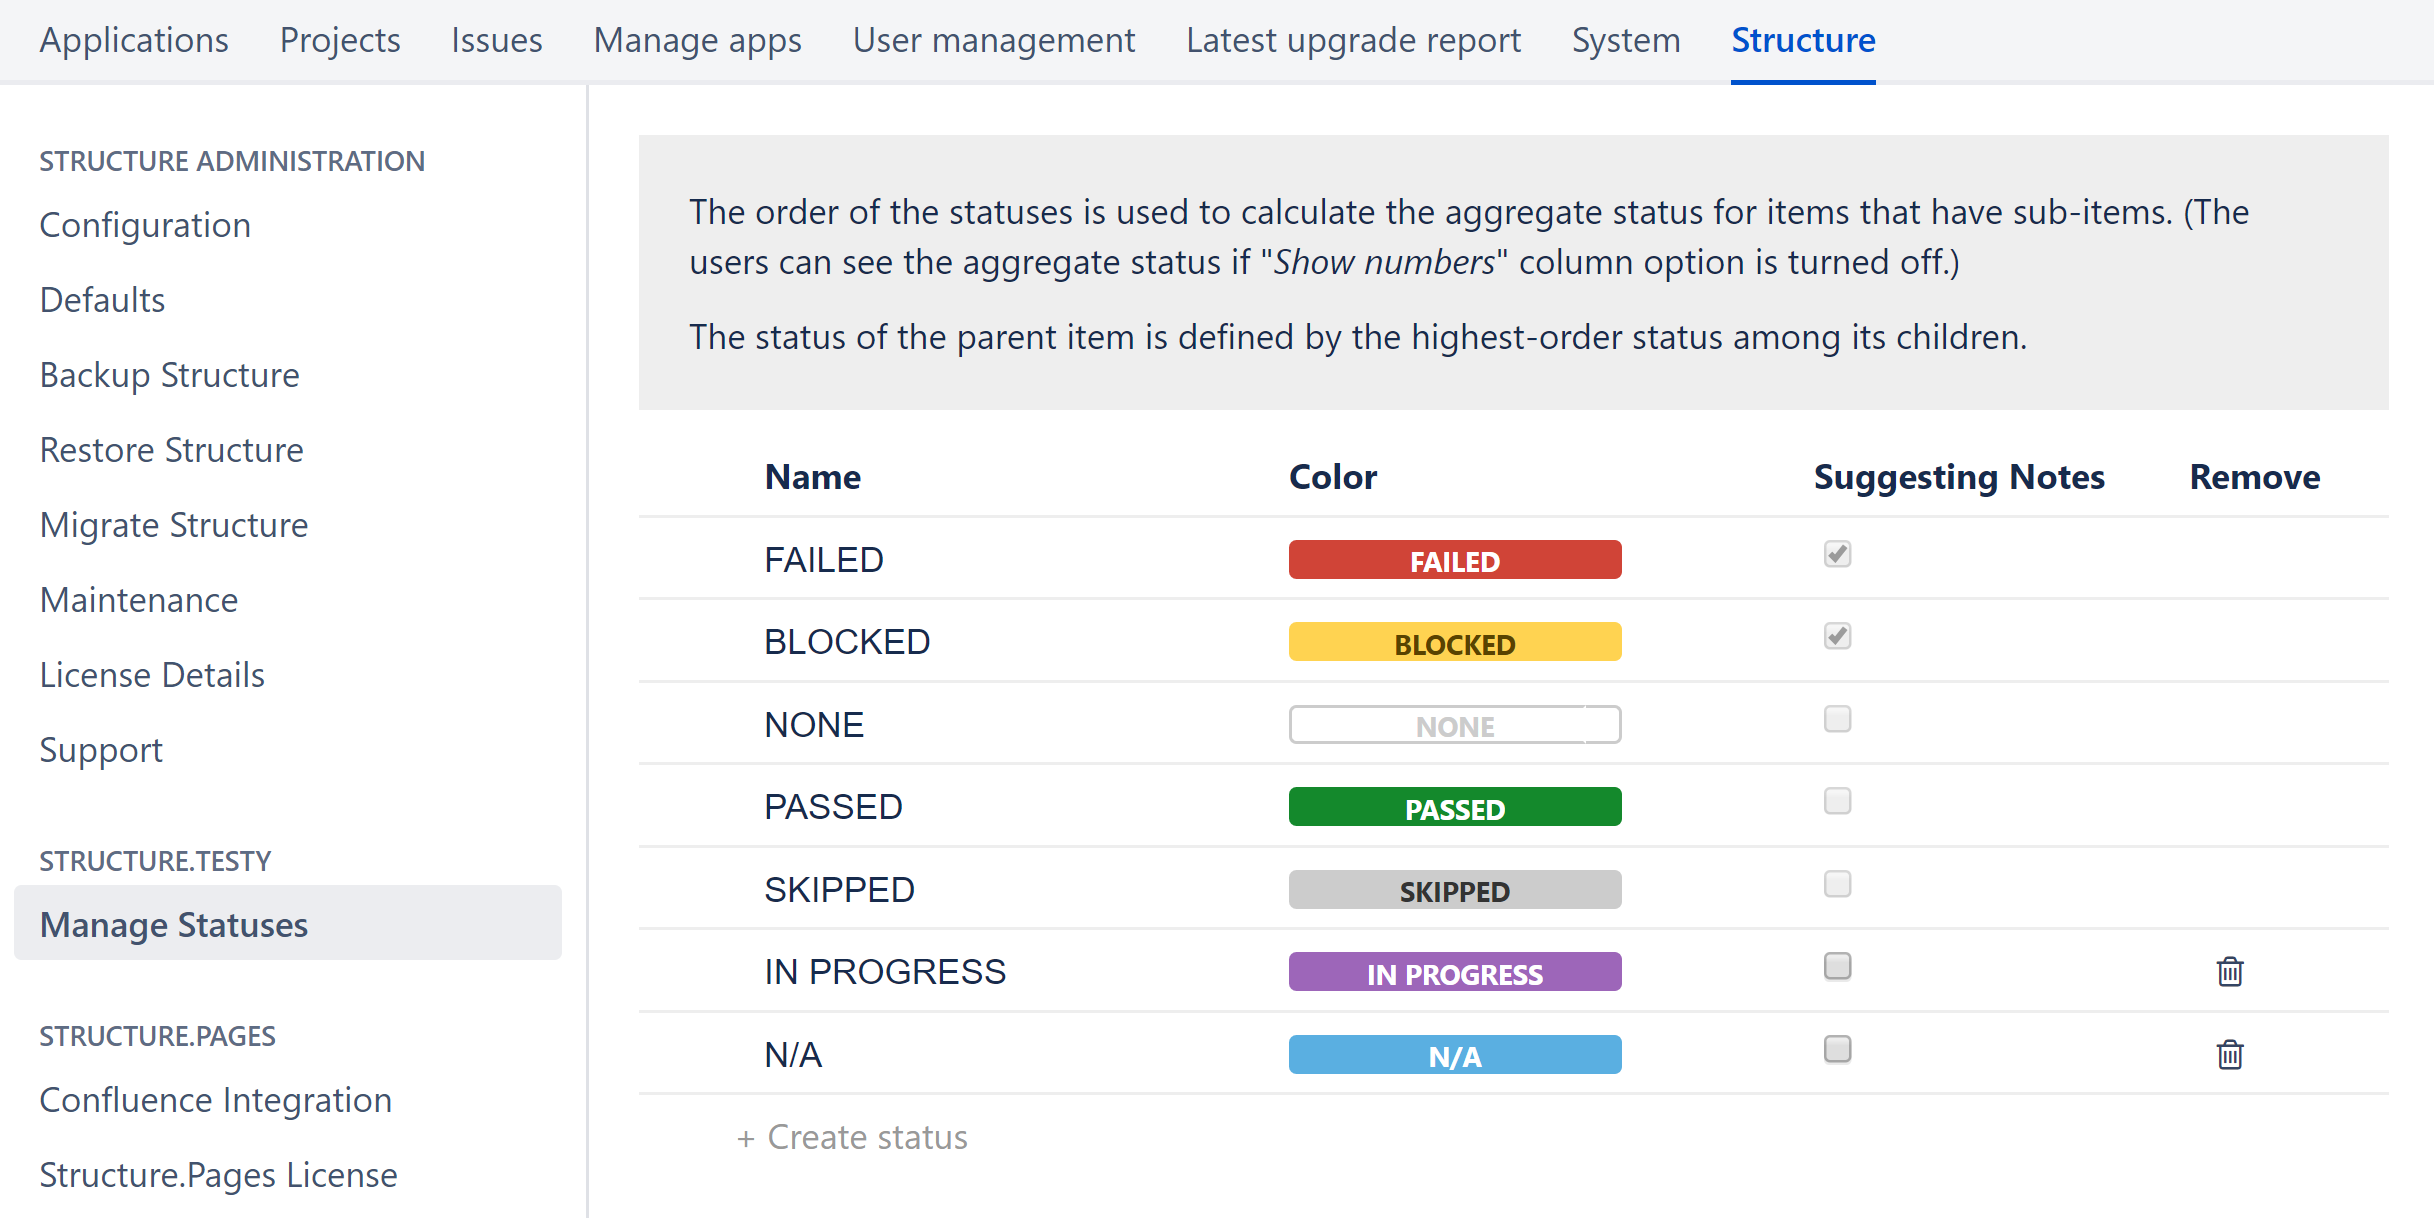 Manage Statuses page